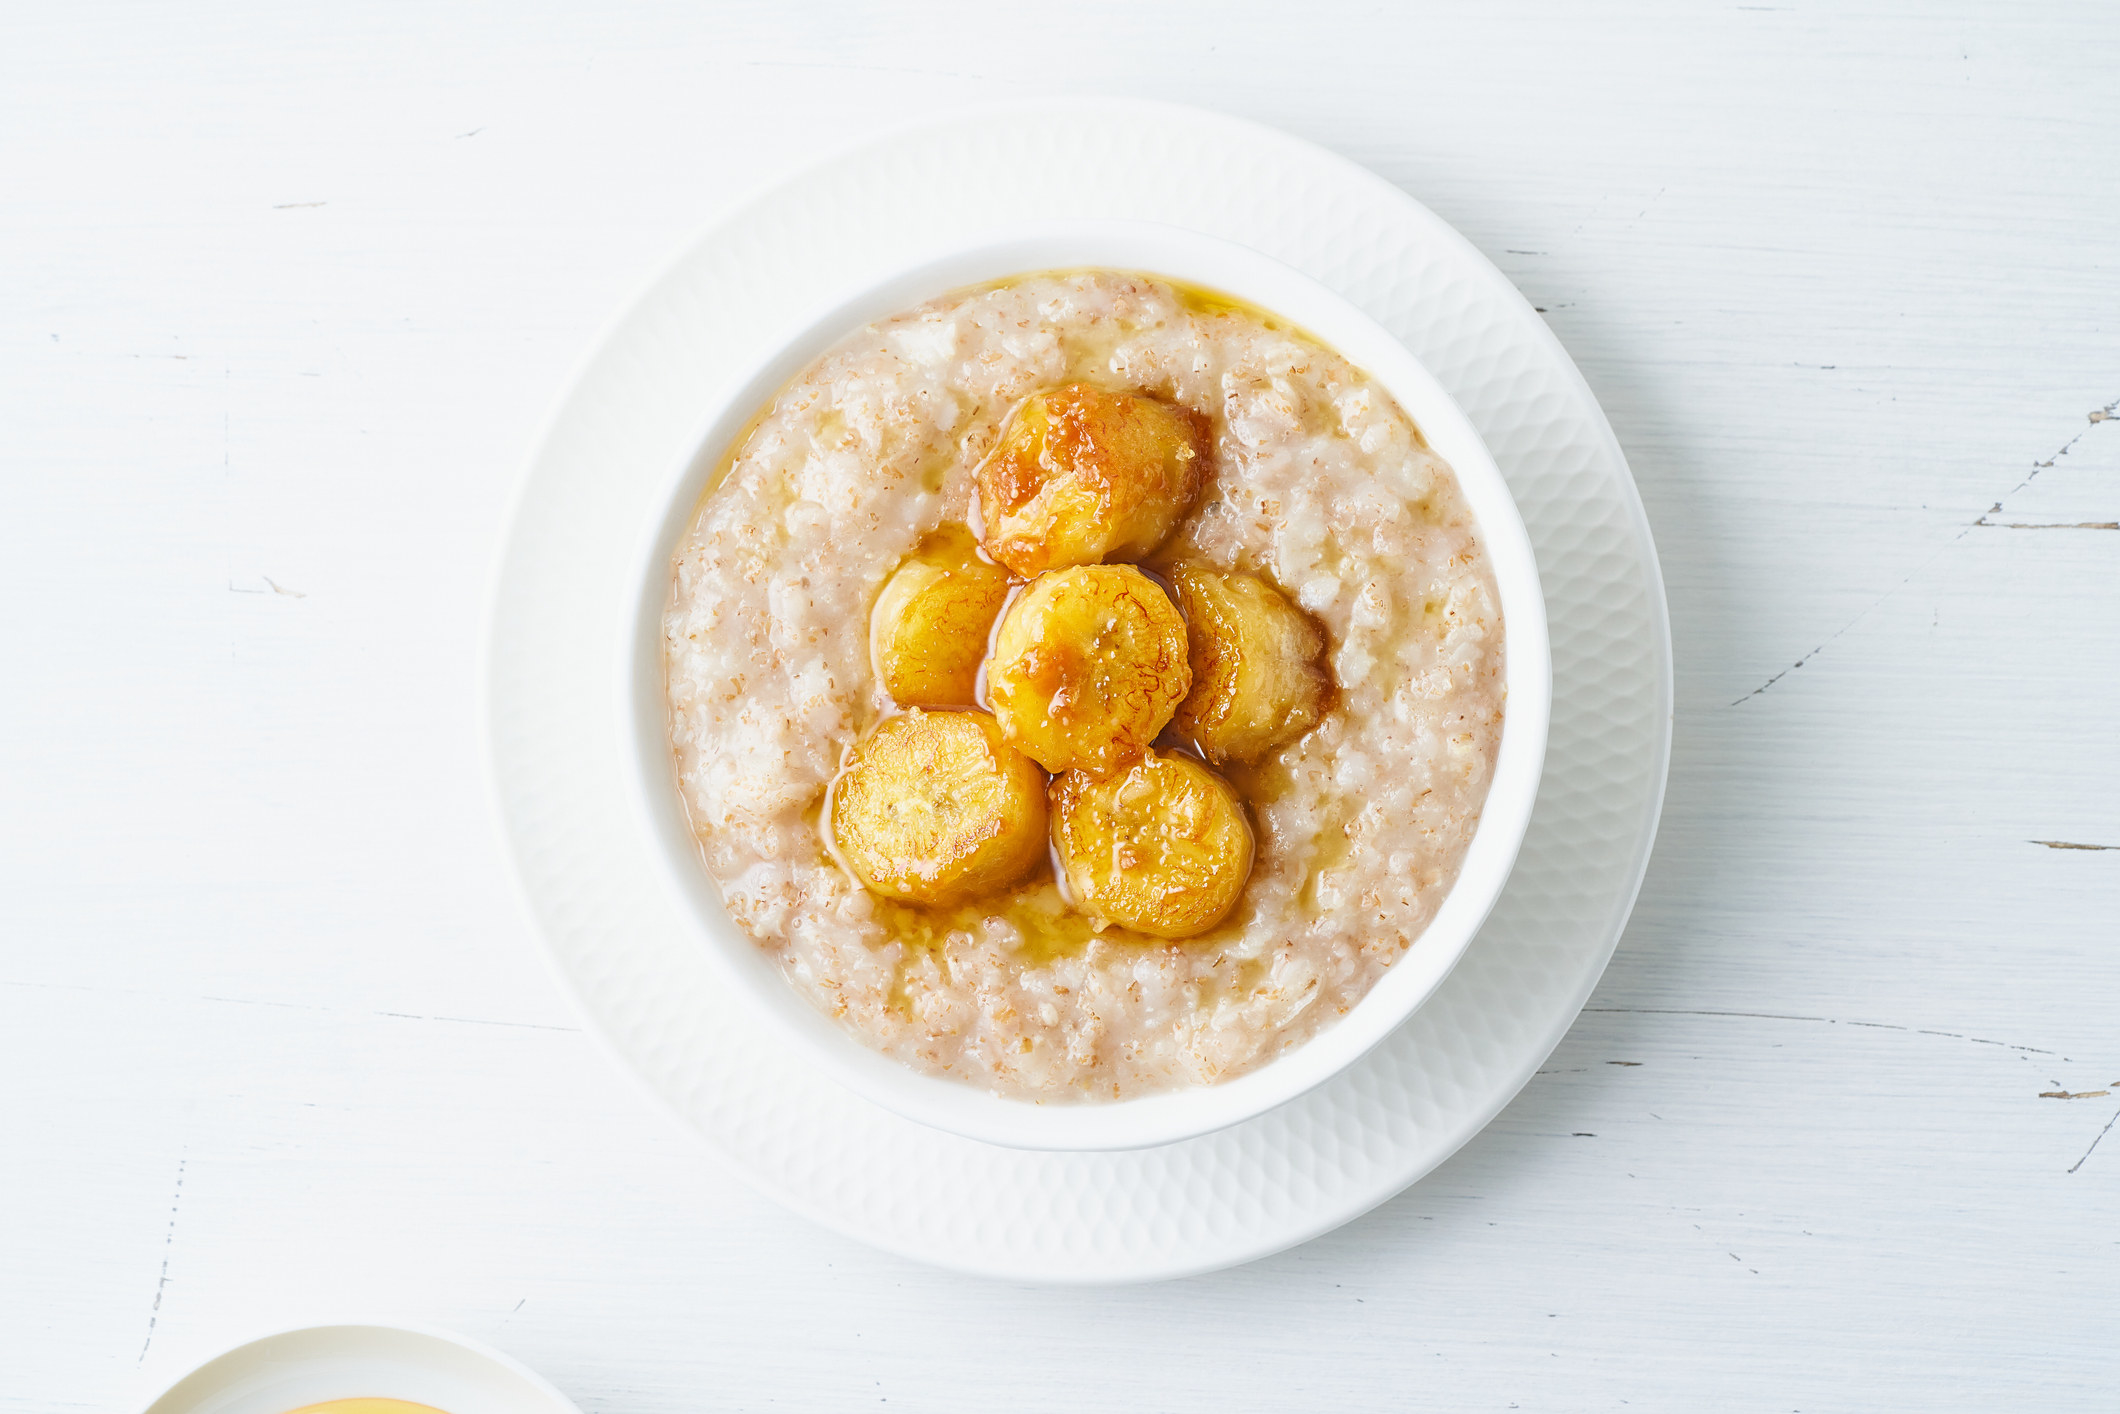 Oatmeal with candied bananas on top